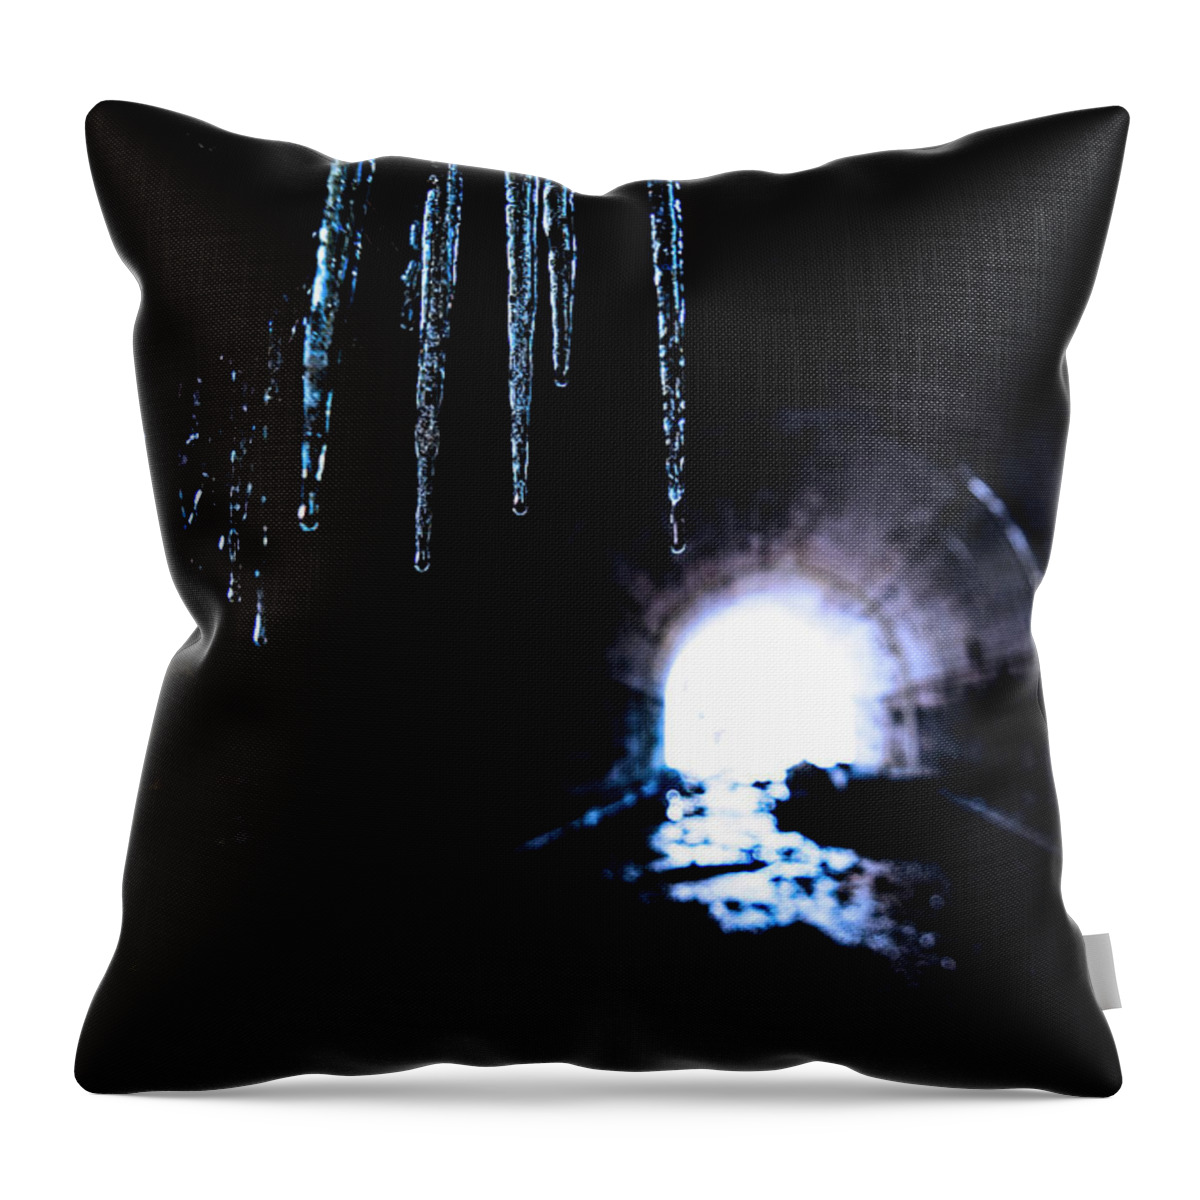 Tunnel Throw Pillow featuring the photograph Tunnel Icicles 2 by Pelo Blanco Photo